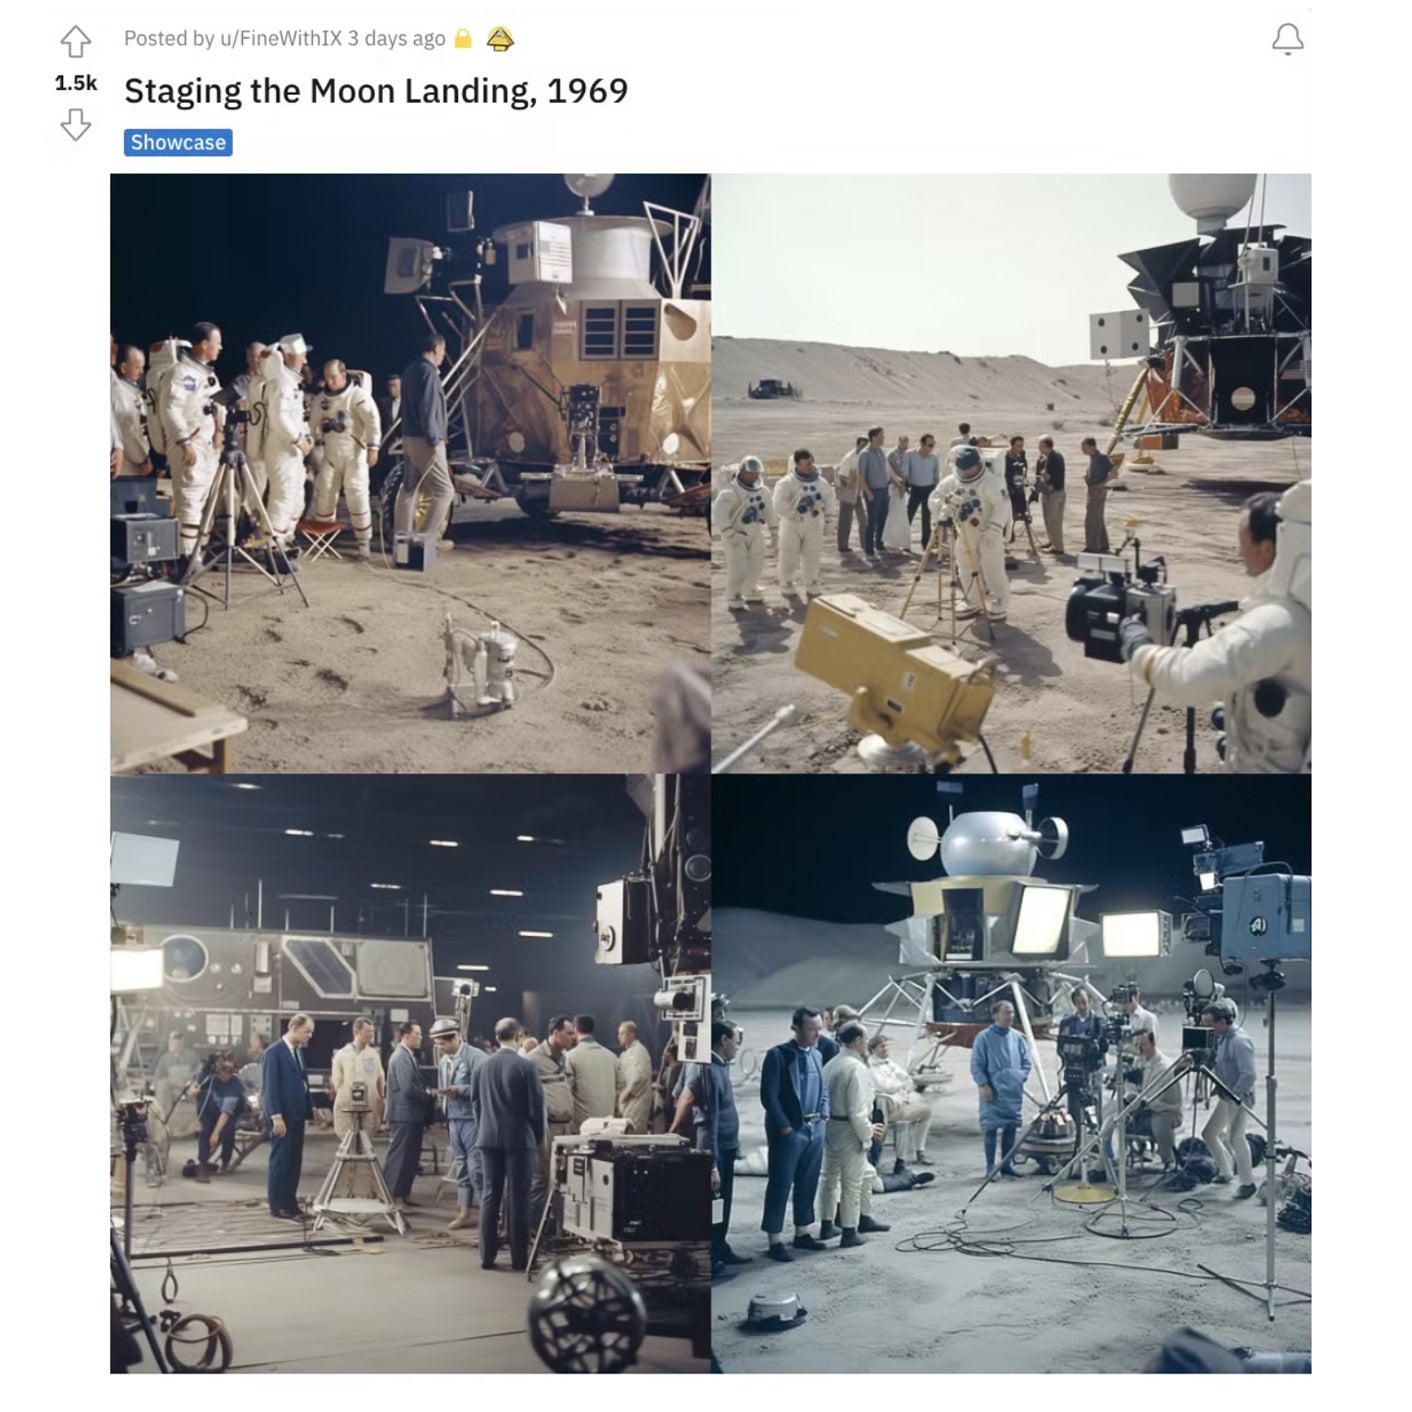 Four photos that purport to show that the moon landing was staged.